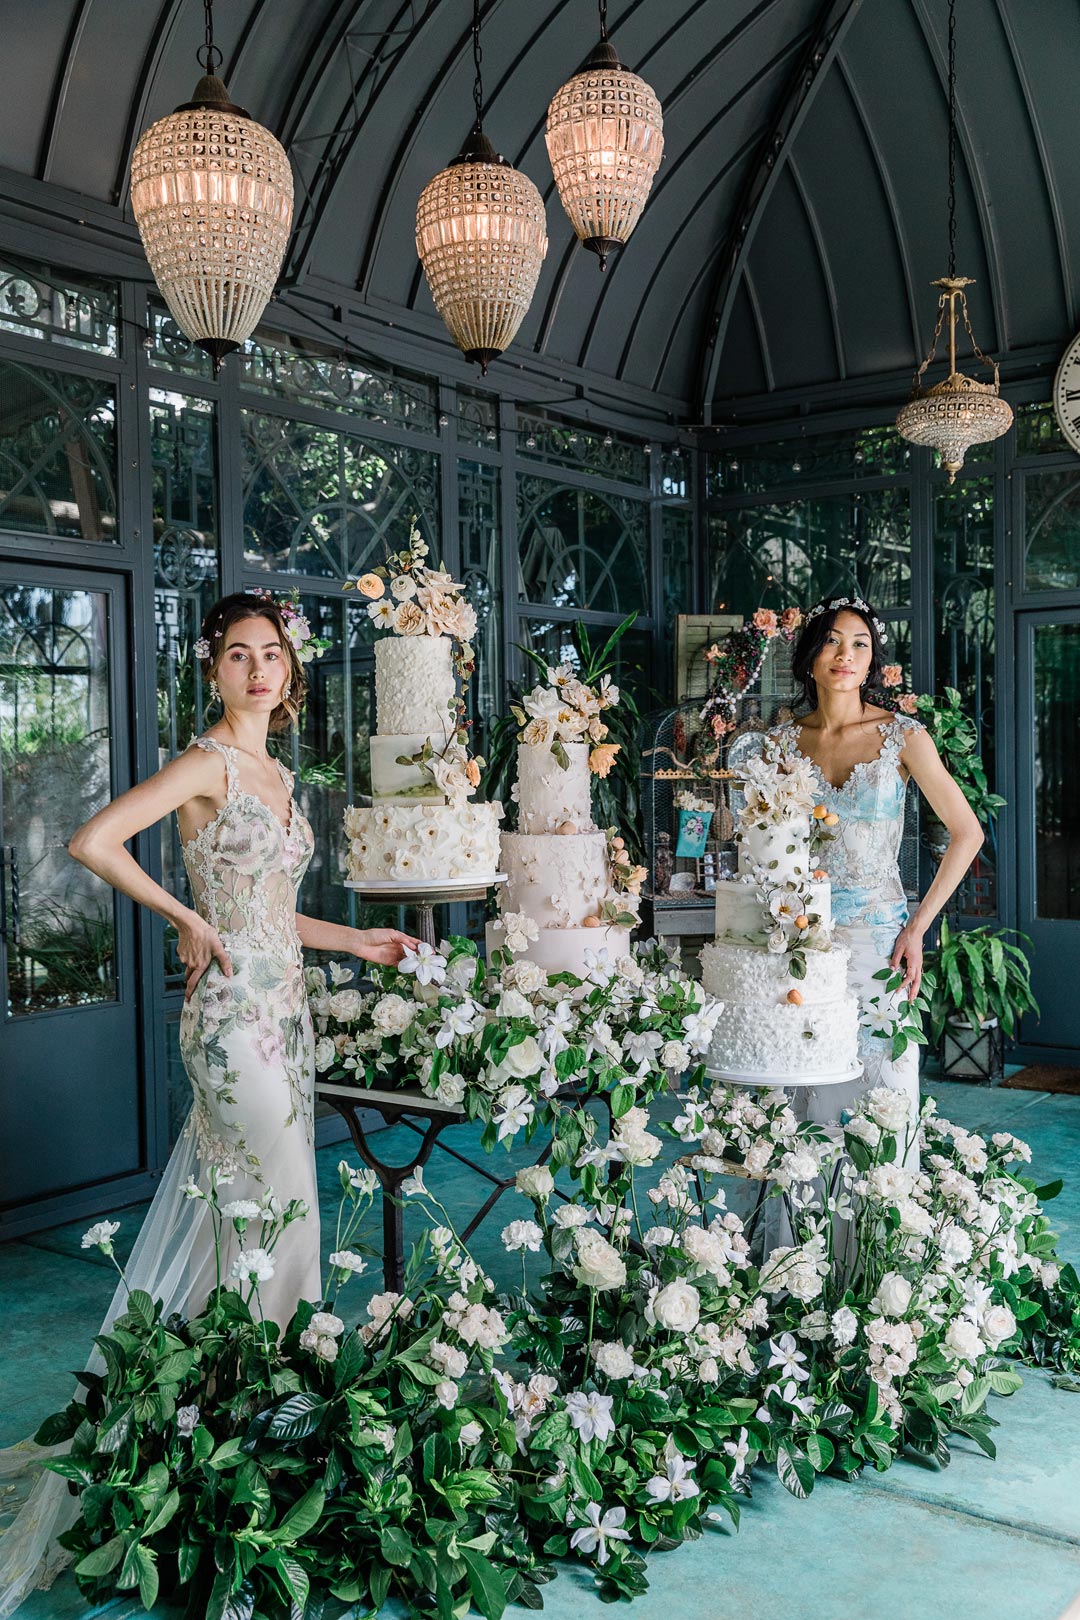 Wedding Cake and Wedding Floral Displays with models in wedding dresses